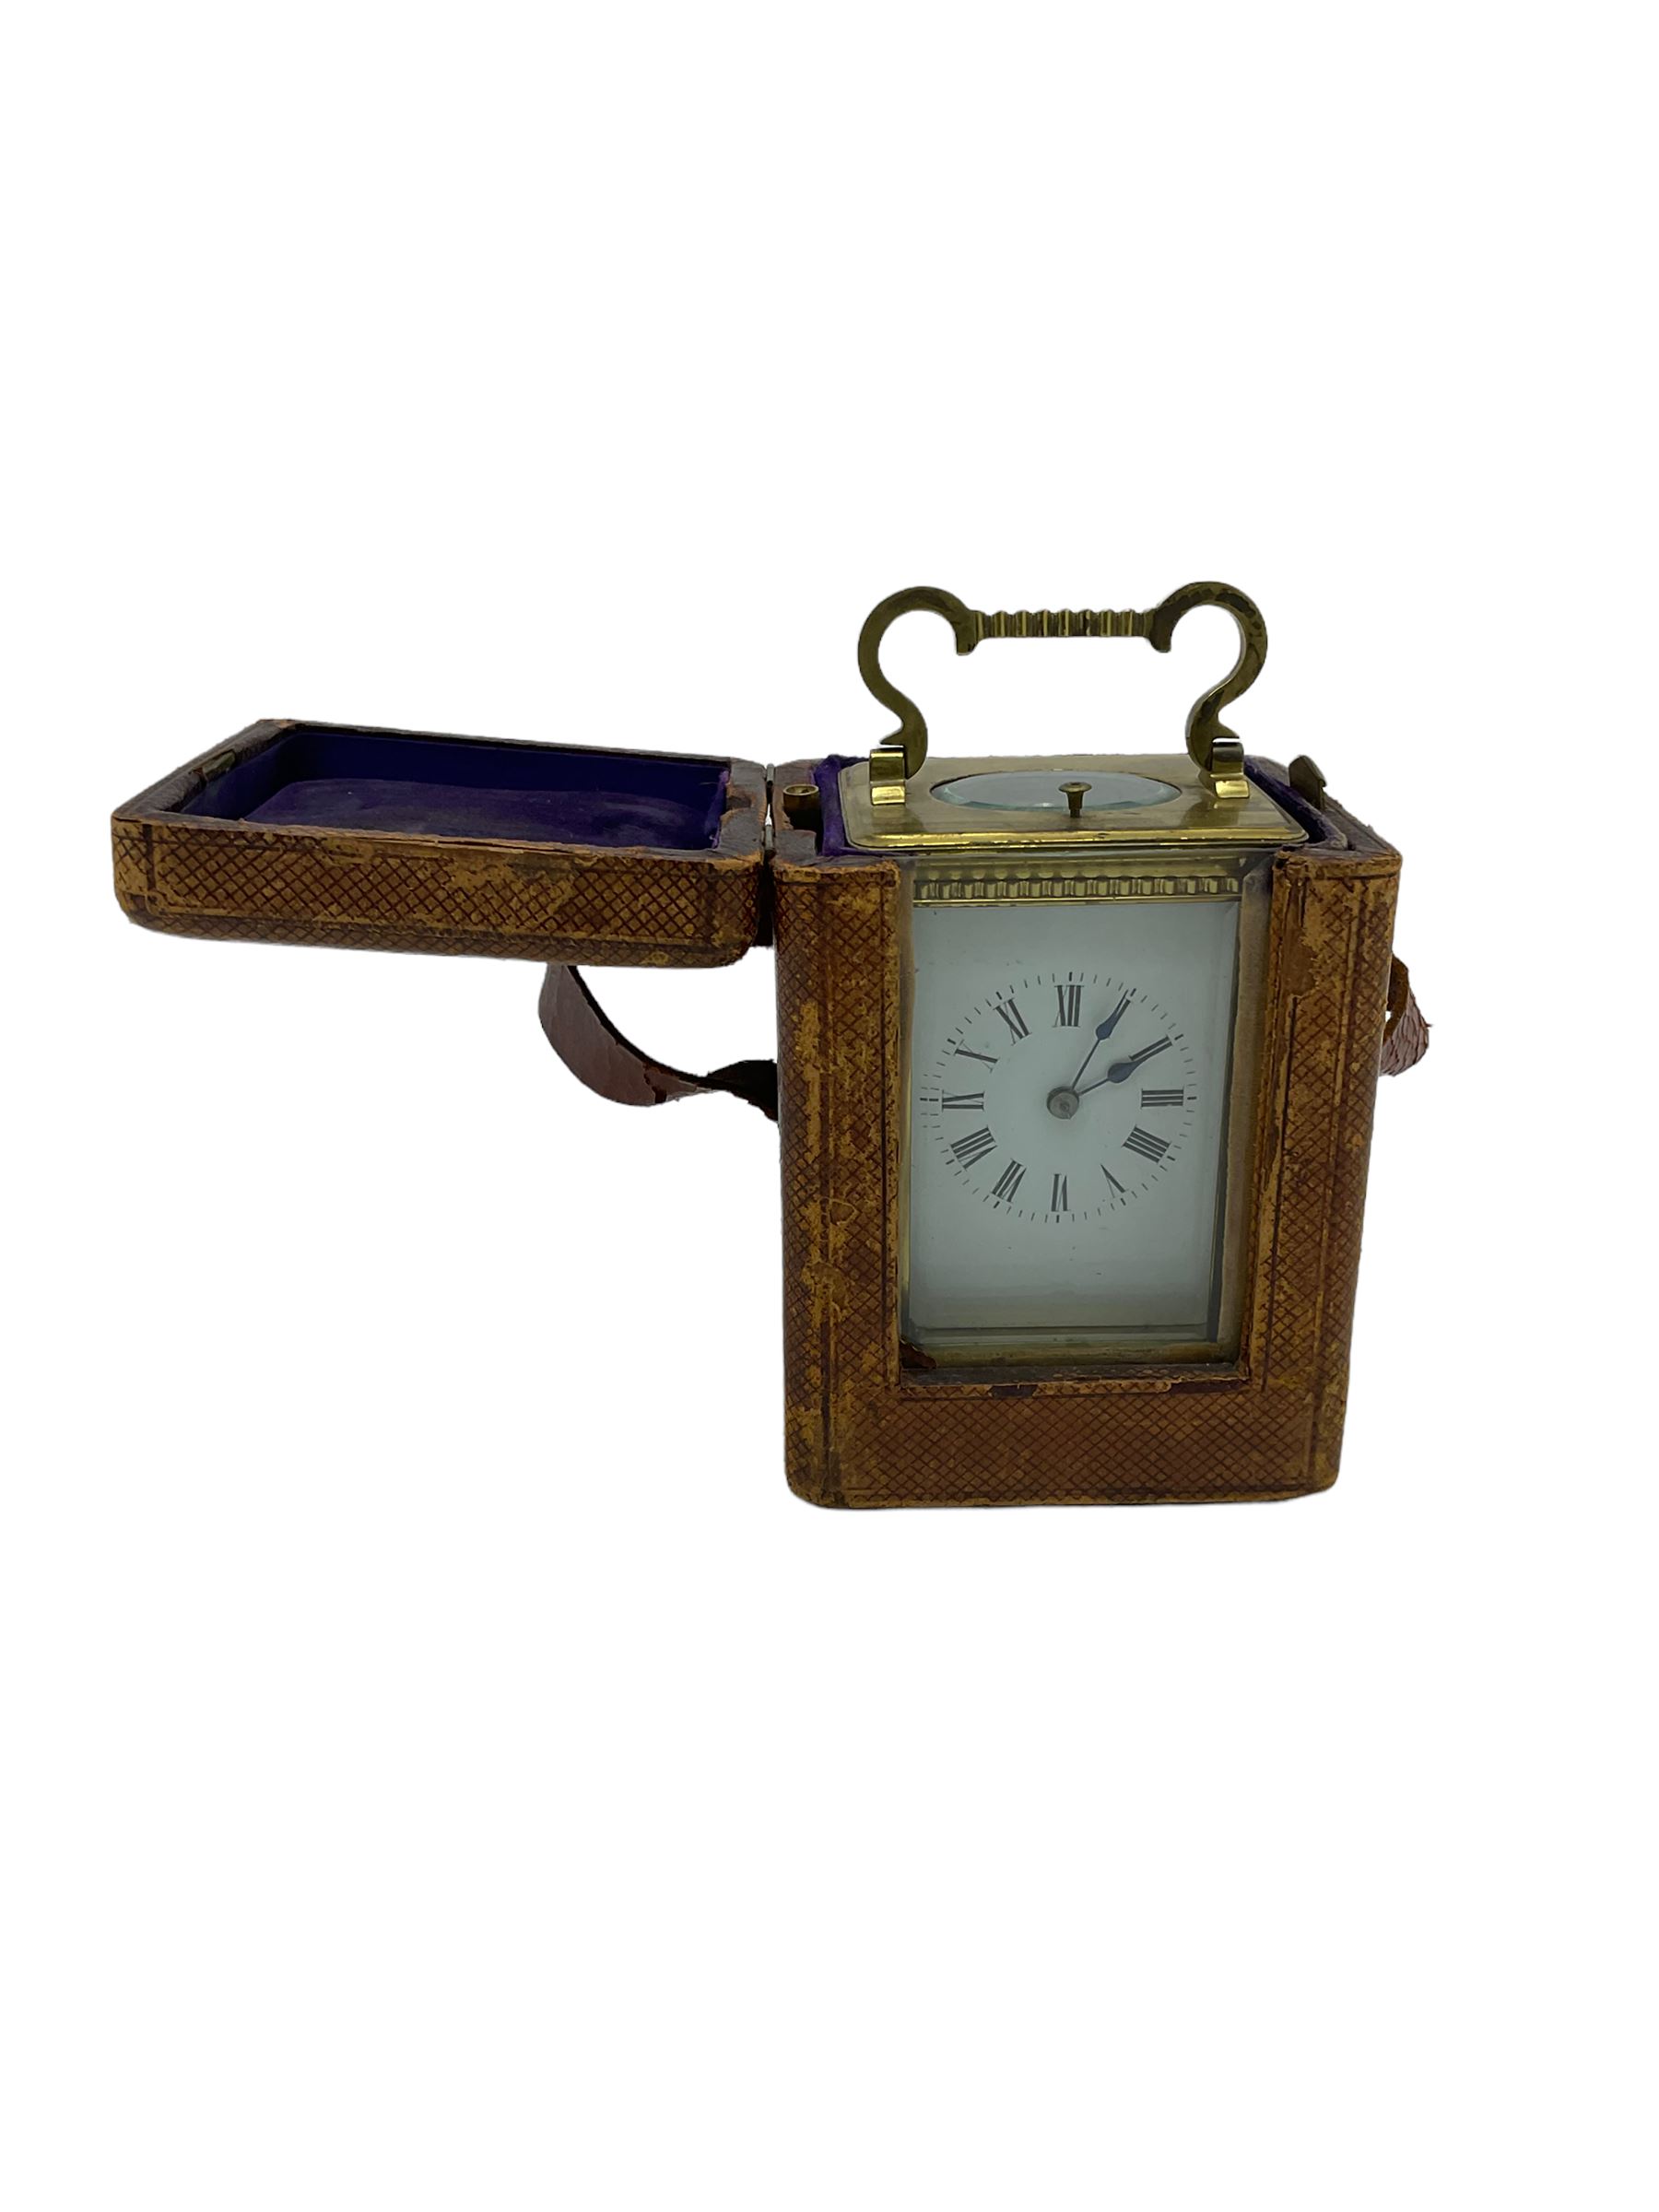 French carriage clock c1910 with strike and repeat work in a corniche case with beadwork - Image 2 of 6